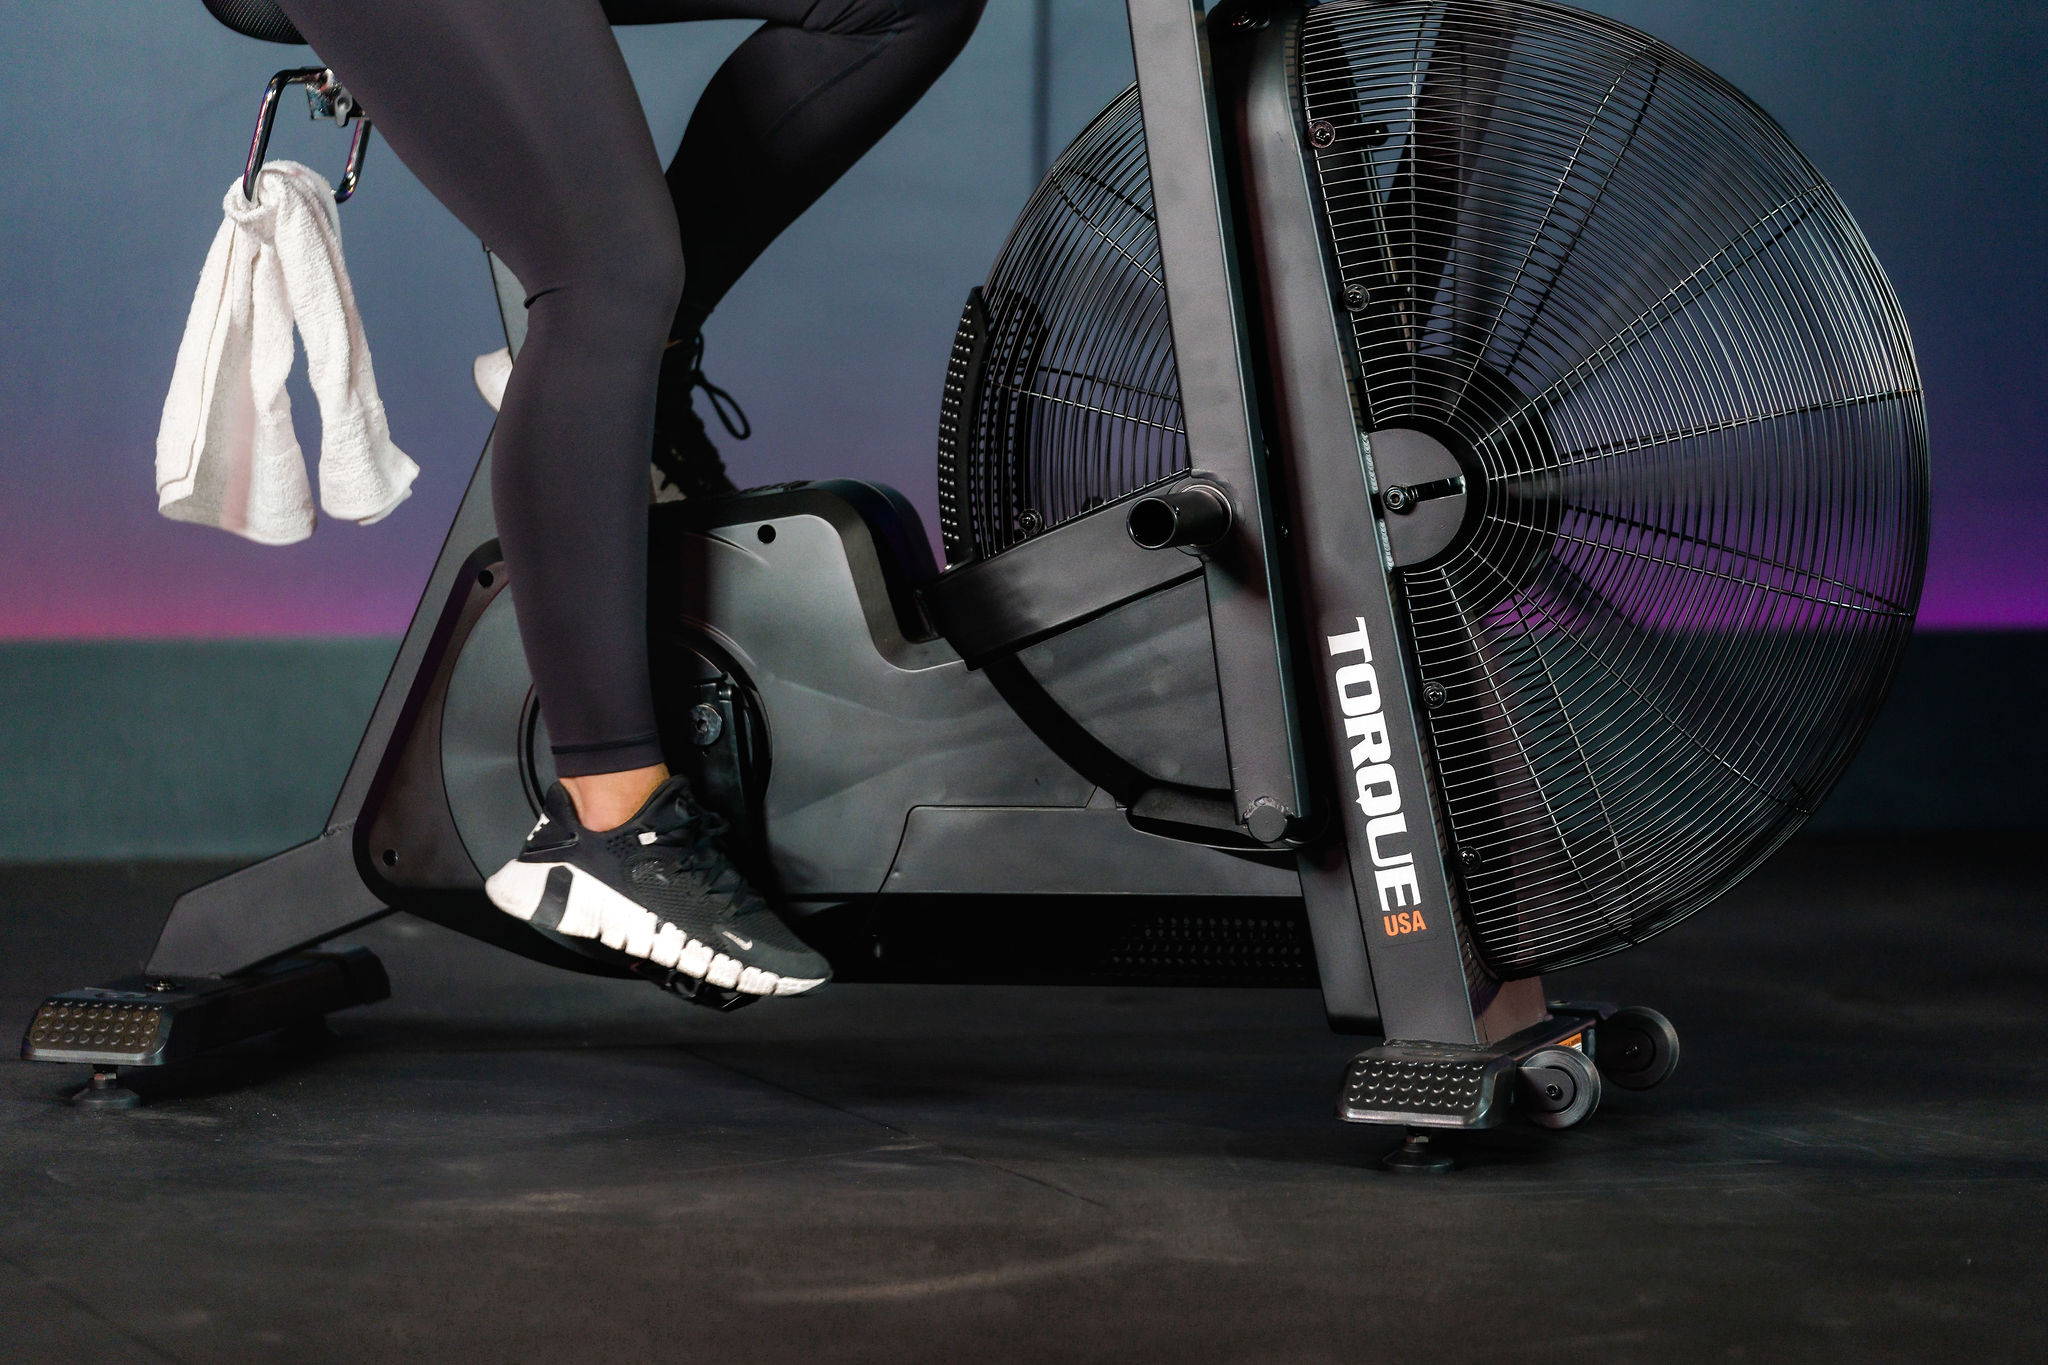 New Torque Stealth Air Bike - National Fitness Trade Journal